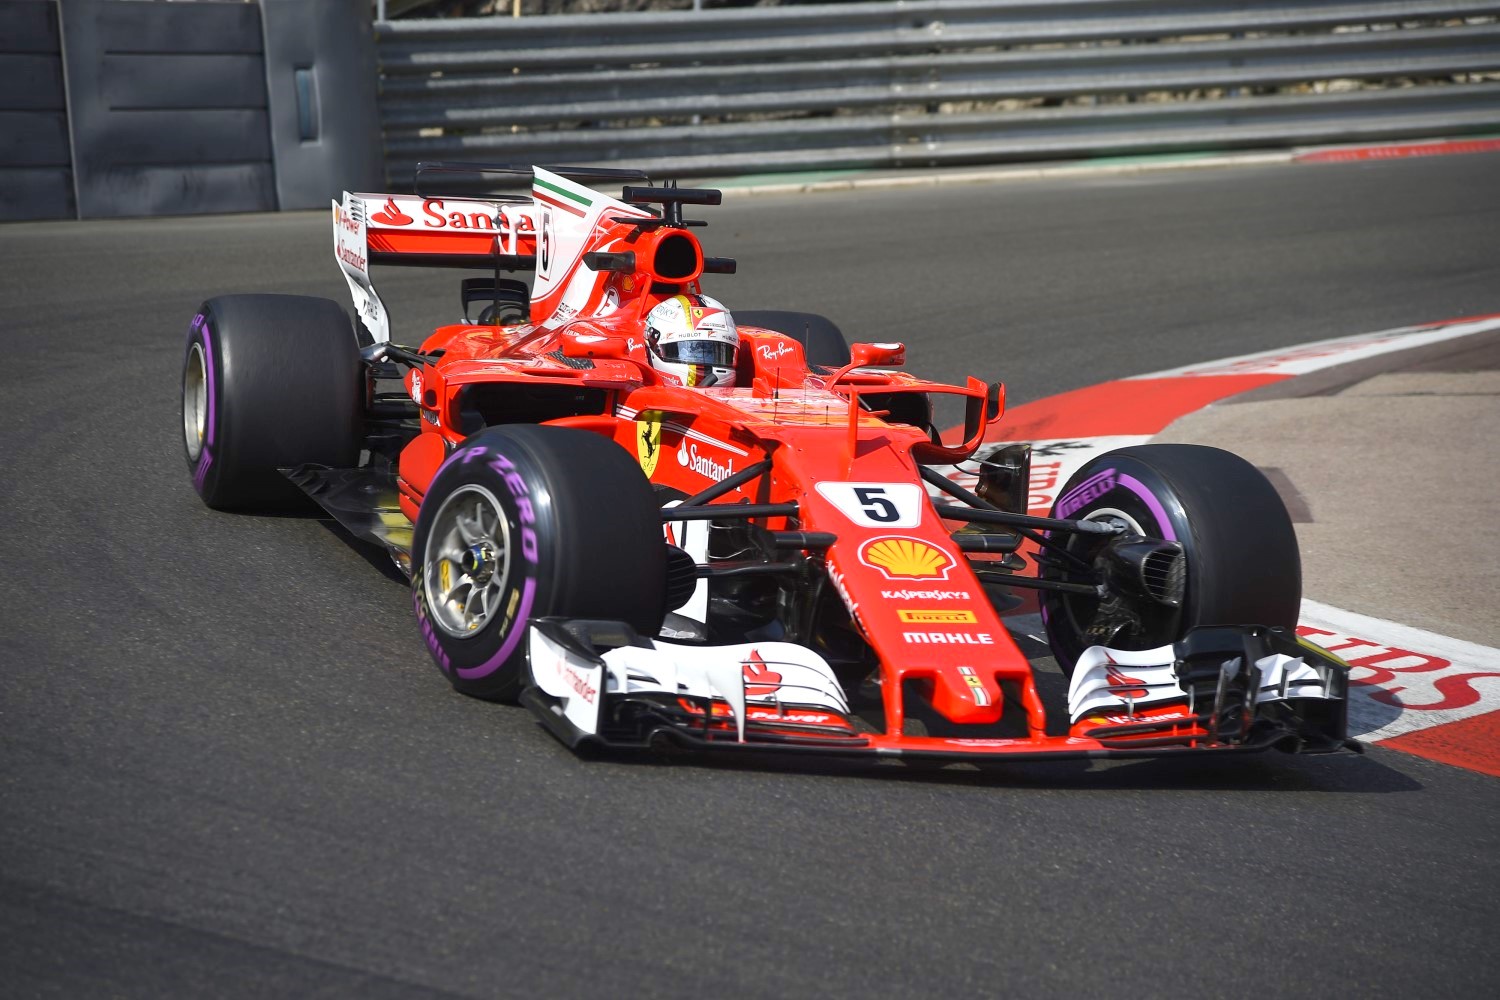 With Two Races Remaining In The 2017 Season, Ferrari's Formula 1 Racing Team Is Currently Second In The Standings, Behind Mercedes-Benz